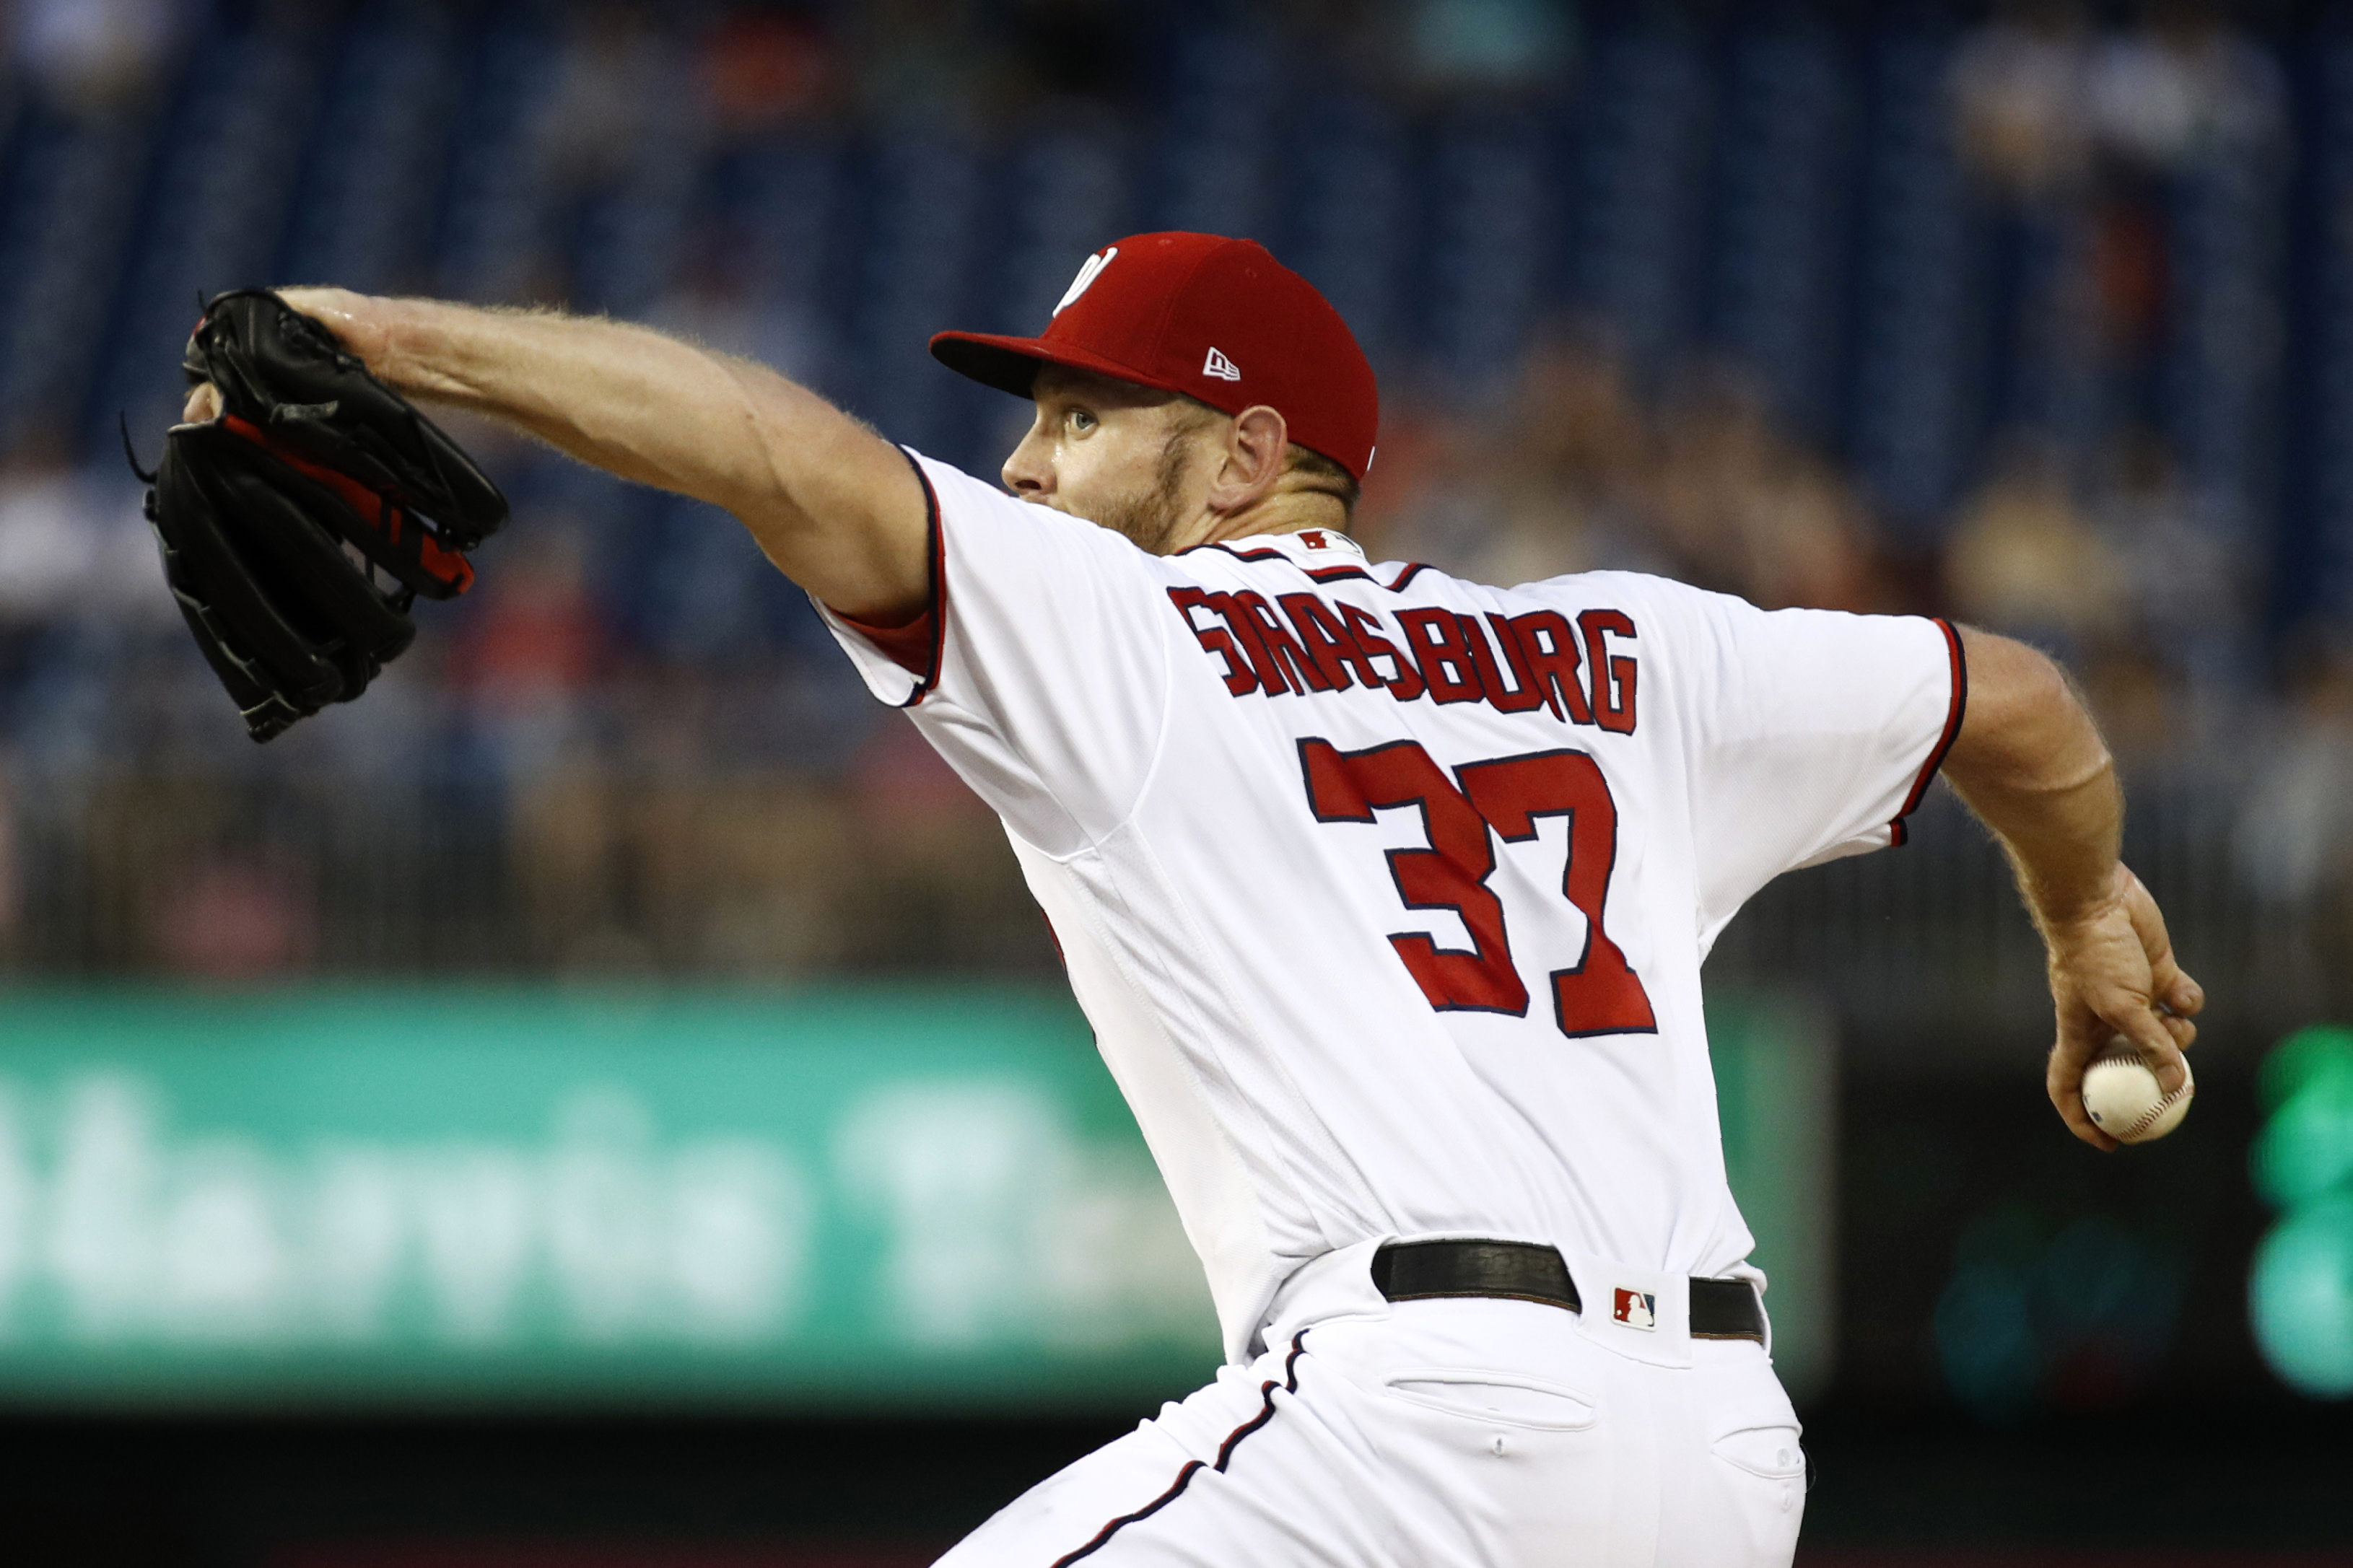 Strasburg immaculate as surging Nationals beat Marlins 3-1